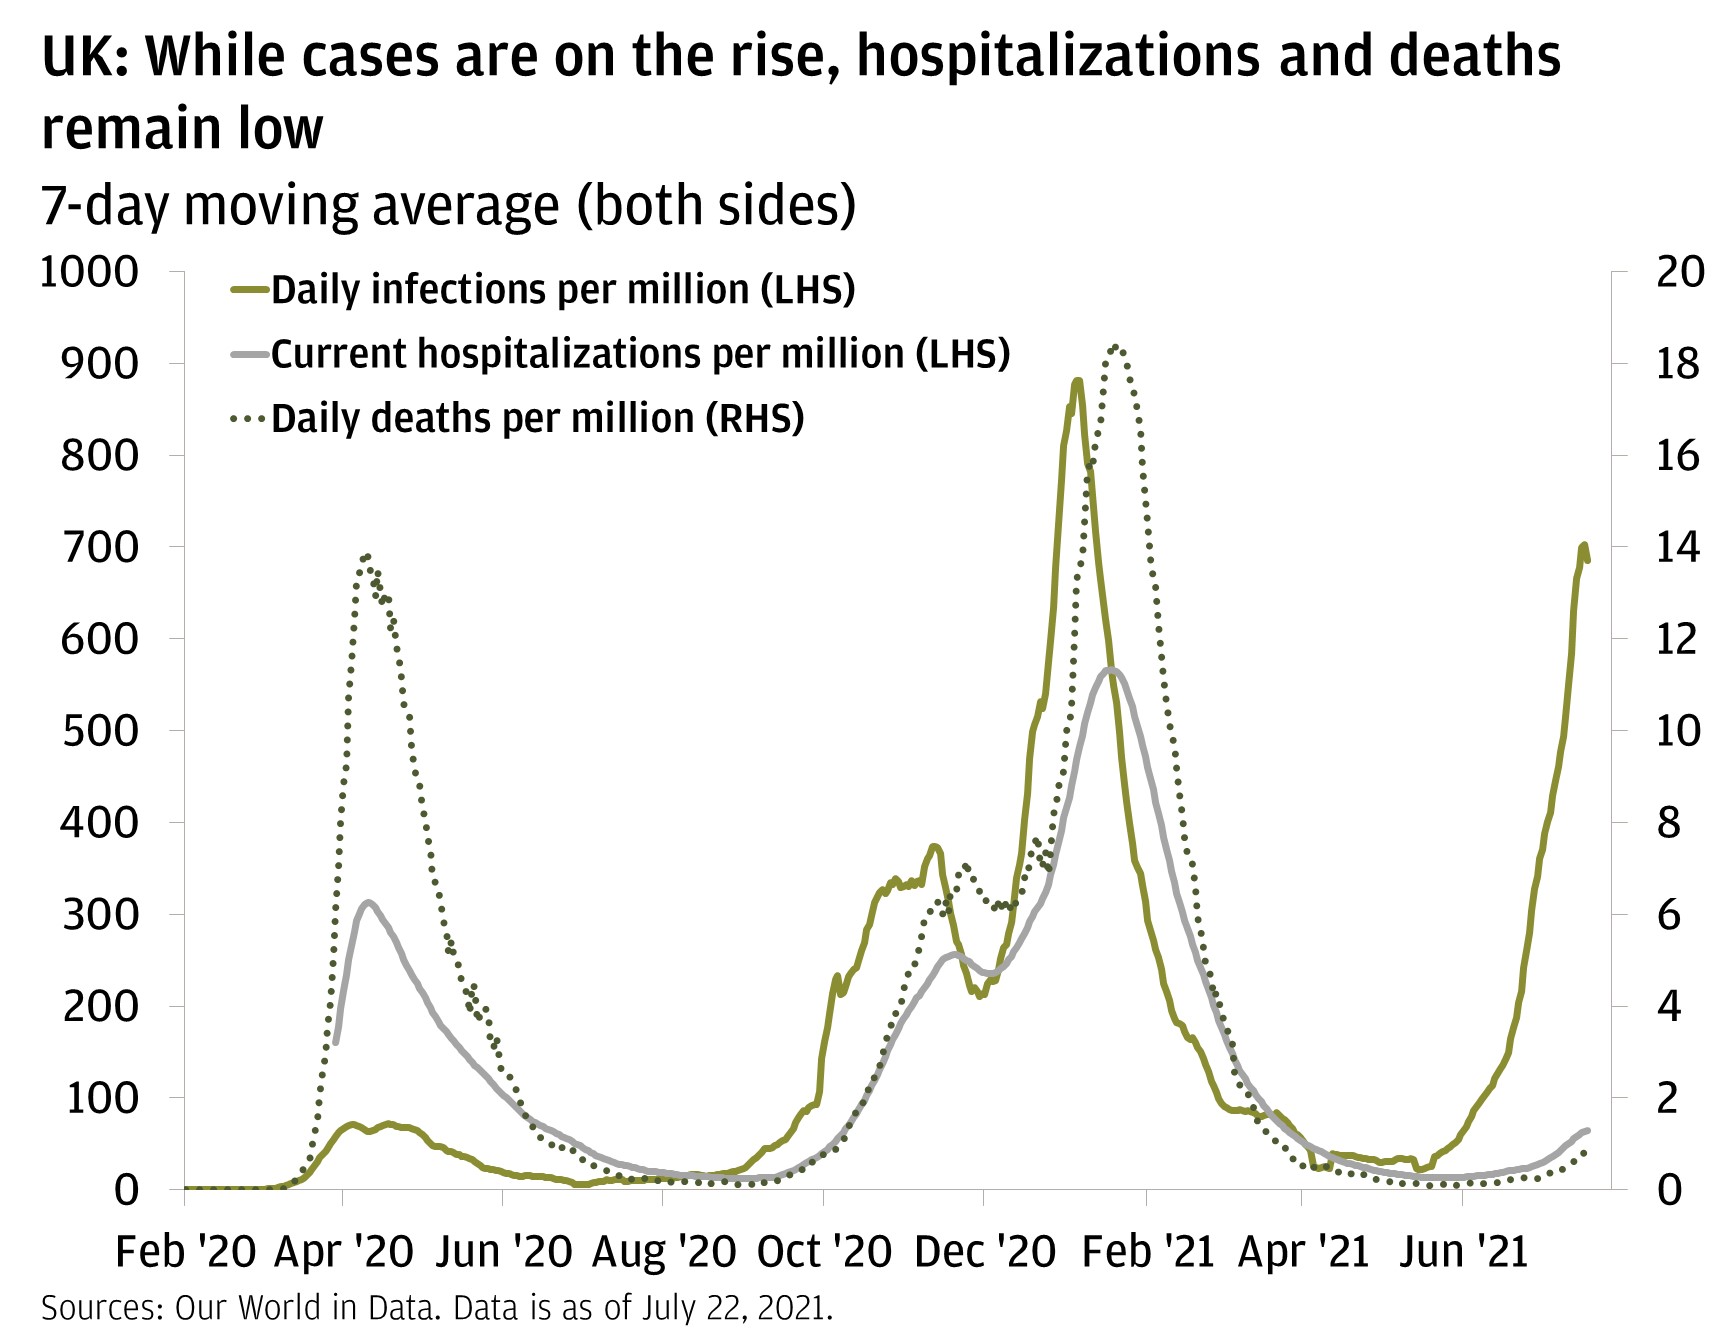 Daily infections start off flat at 0 in February 2020 and then increase to approximately 50 in April 2020. They then dip to nearly 0 from June 2020 to September 2020. They then rise to approximately 350 in November 2020. This then dips down to approximately 200 in December 2020. There is then another spike in January 2021 at approximately 900. This then drops down to approximately 50 between April and May 2021. There is then another increase to approximately 700 in July 2021. Current hospitalizations starts at approximately 150 in April 2020 and increase to approximately 300 in May 2020. This then drops to nearly 0 in August 2020 until November 2020, when it increases to approximately 250. There is then another increase to approximately 550 in February 2021. There is then a drop to approximately 50 in between April 2021 and July 2021. Daily deaths start at approximately 0 in February 2020 and then increase to approximately 14 in April 2020. This then drops to approximately 0 in between July 2020 and September 2020. There is then an increase to approximately 7 in November 2020. This then increases to approximately 18 in February 2021. There is then a drop to around 0 in between April 2021 and July 2021.